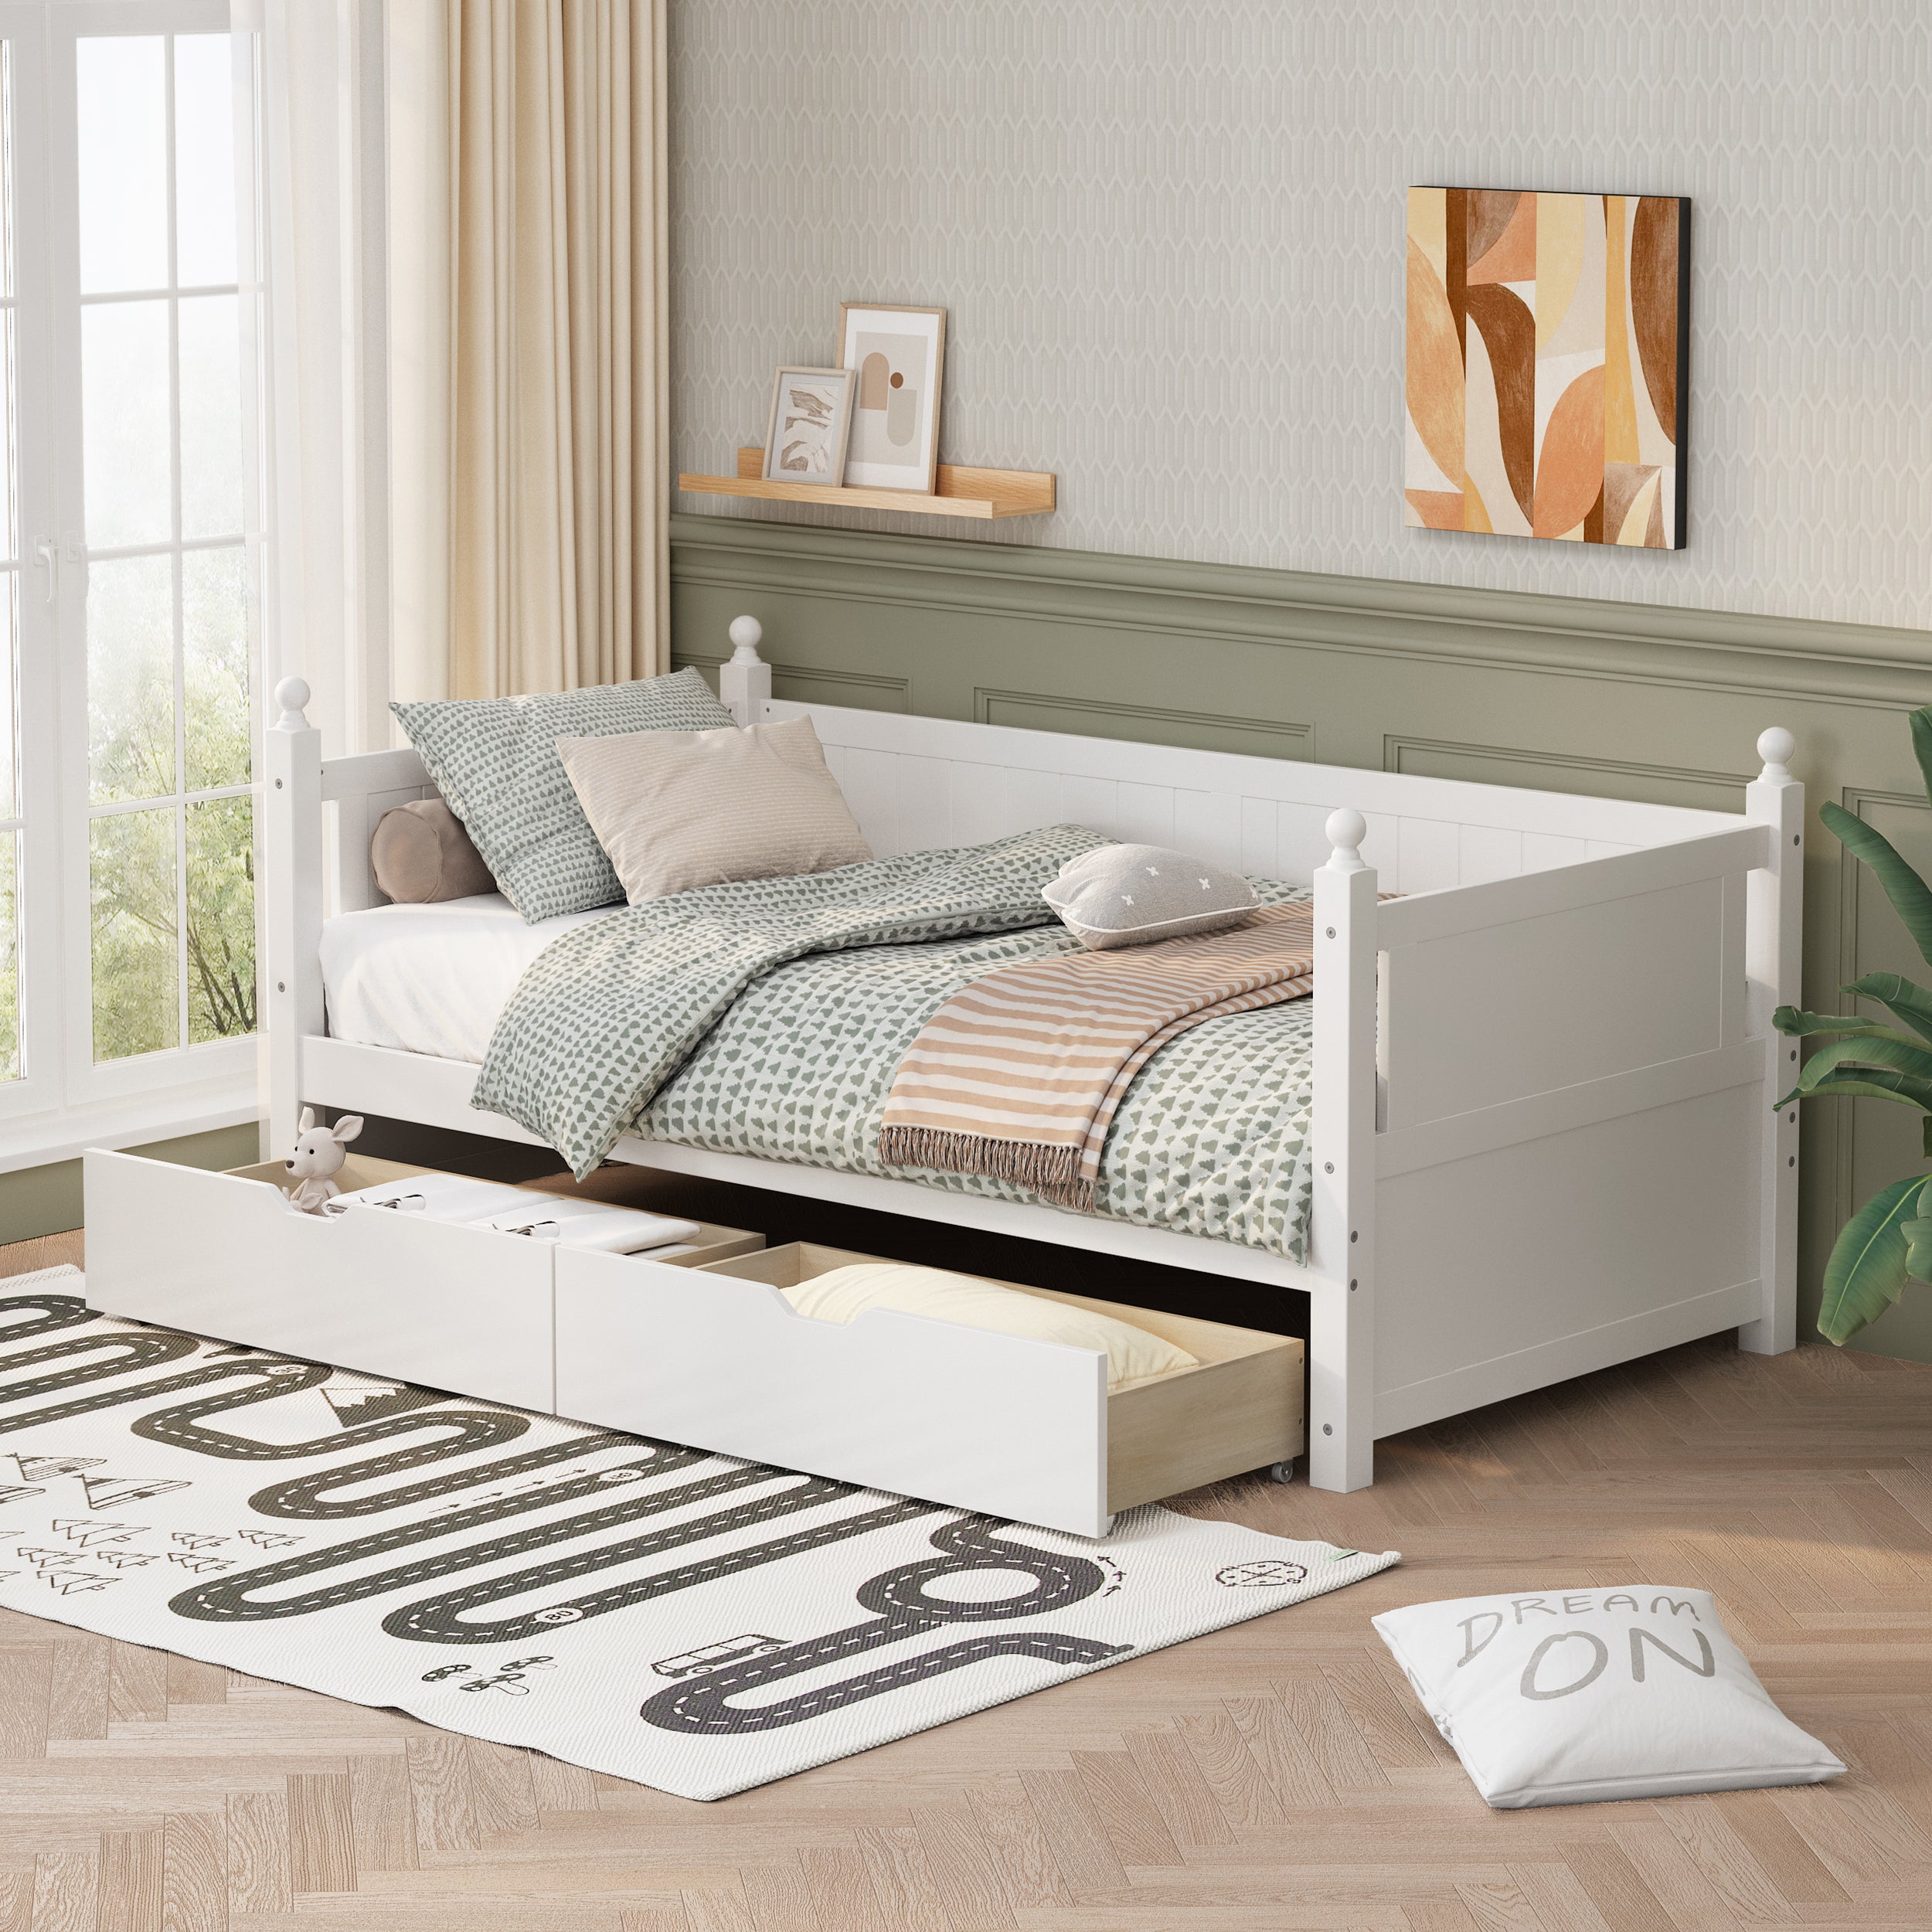 Twin-Size-Solid-Wood-Daybed-with-2-drawers-for-Limited-Space-Kids,-Teens,-Adults,-No-Need-Box-Spring,-White-Kids-Beds